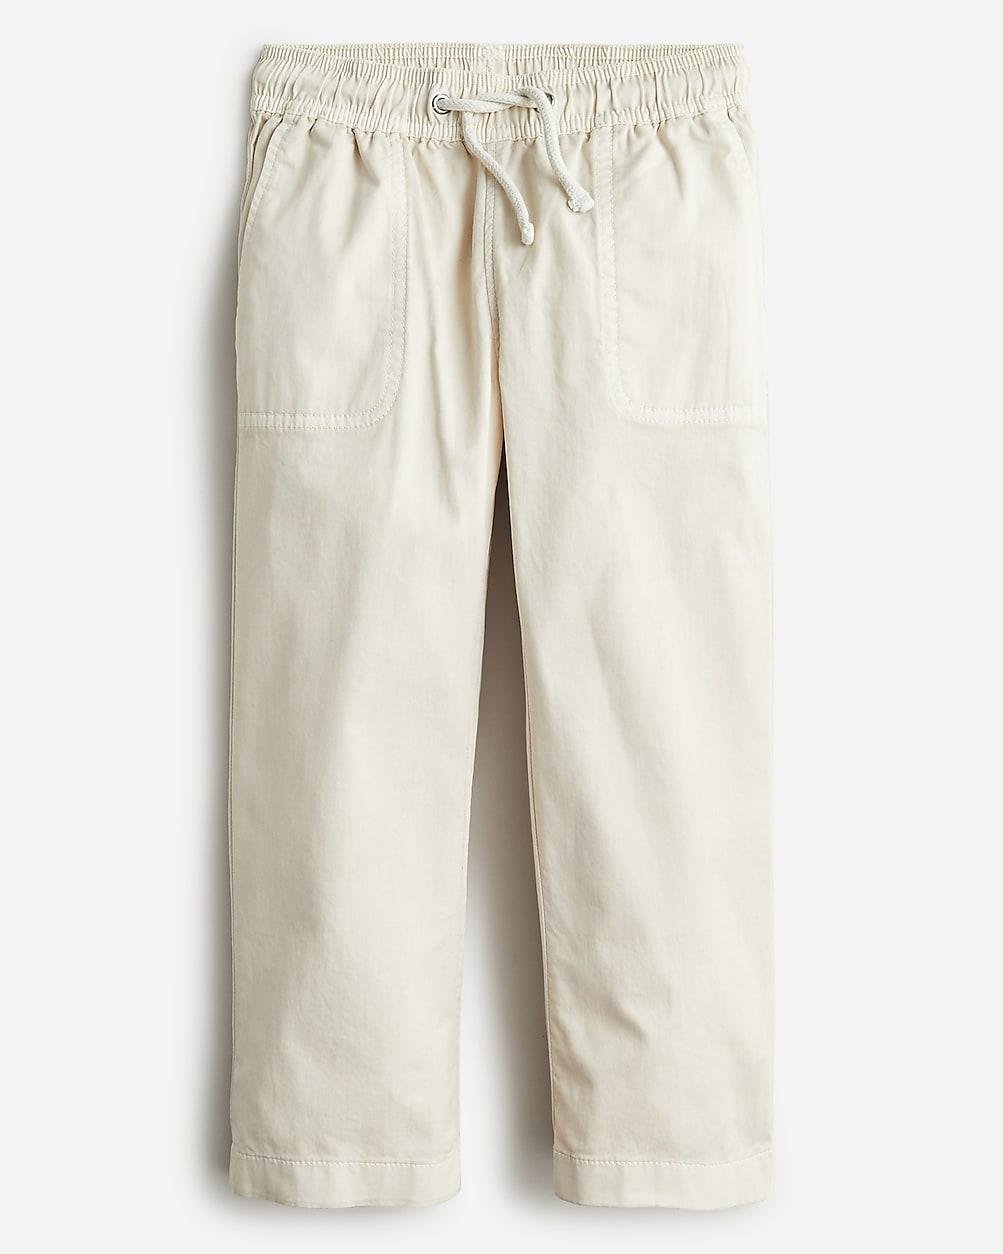 Boys' relaxed-fit pull-on chino pant by J.CREW